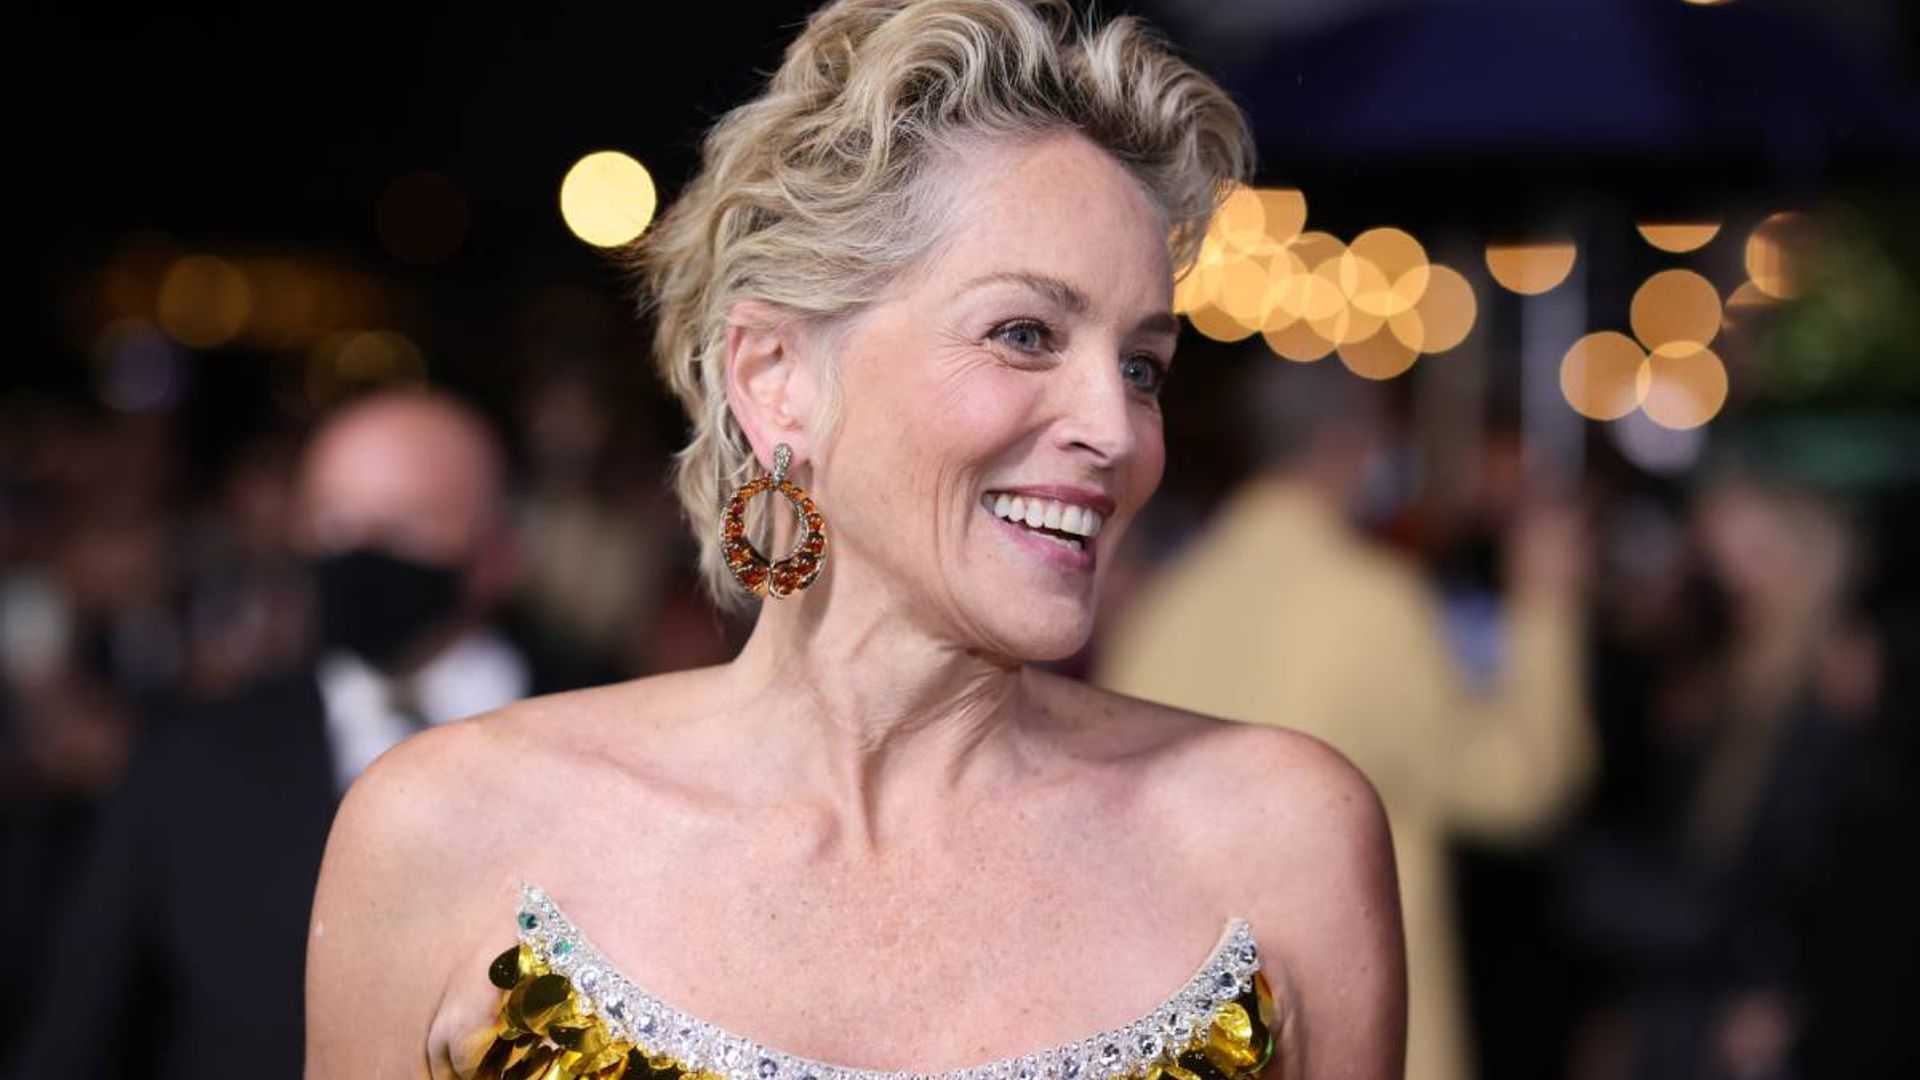 Sharon Stone stuns fans with glamorous behind the scenes photo